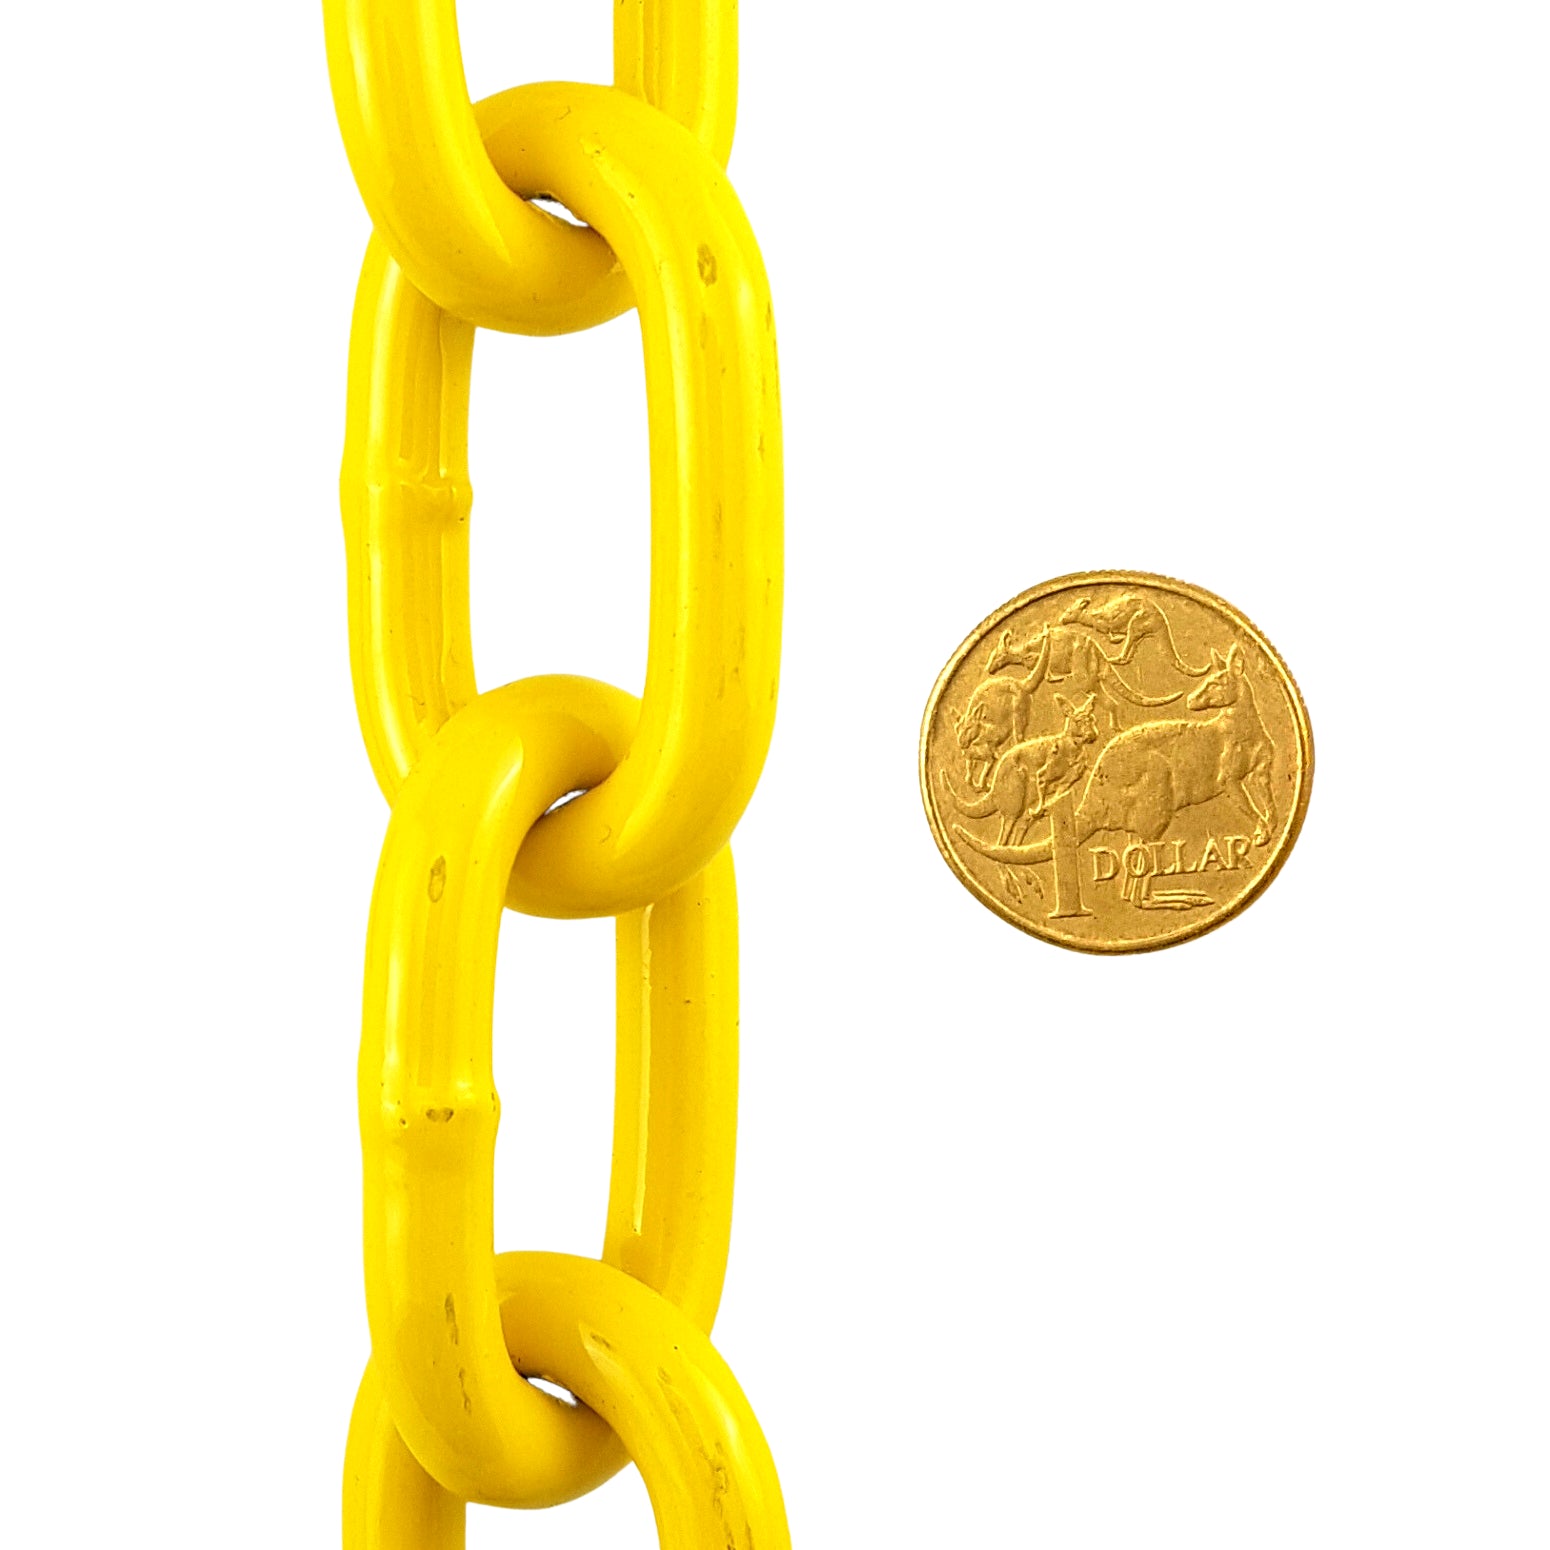 Welded Steel Chain - Yellow Powder Coated - 8mm x 25kg. Australia wide delivery.